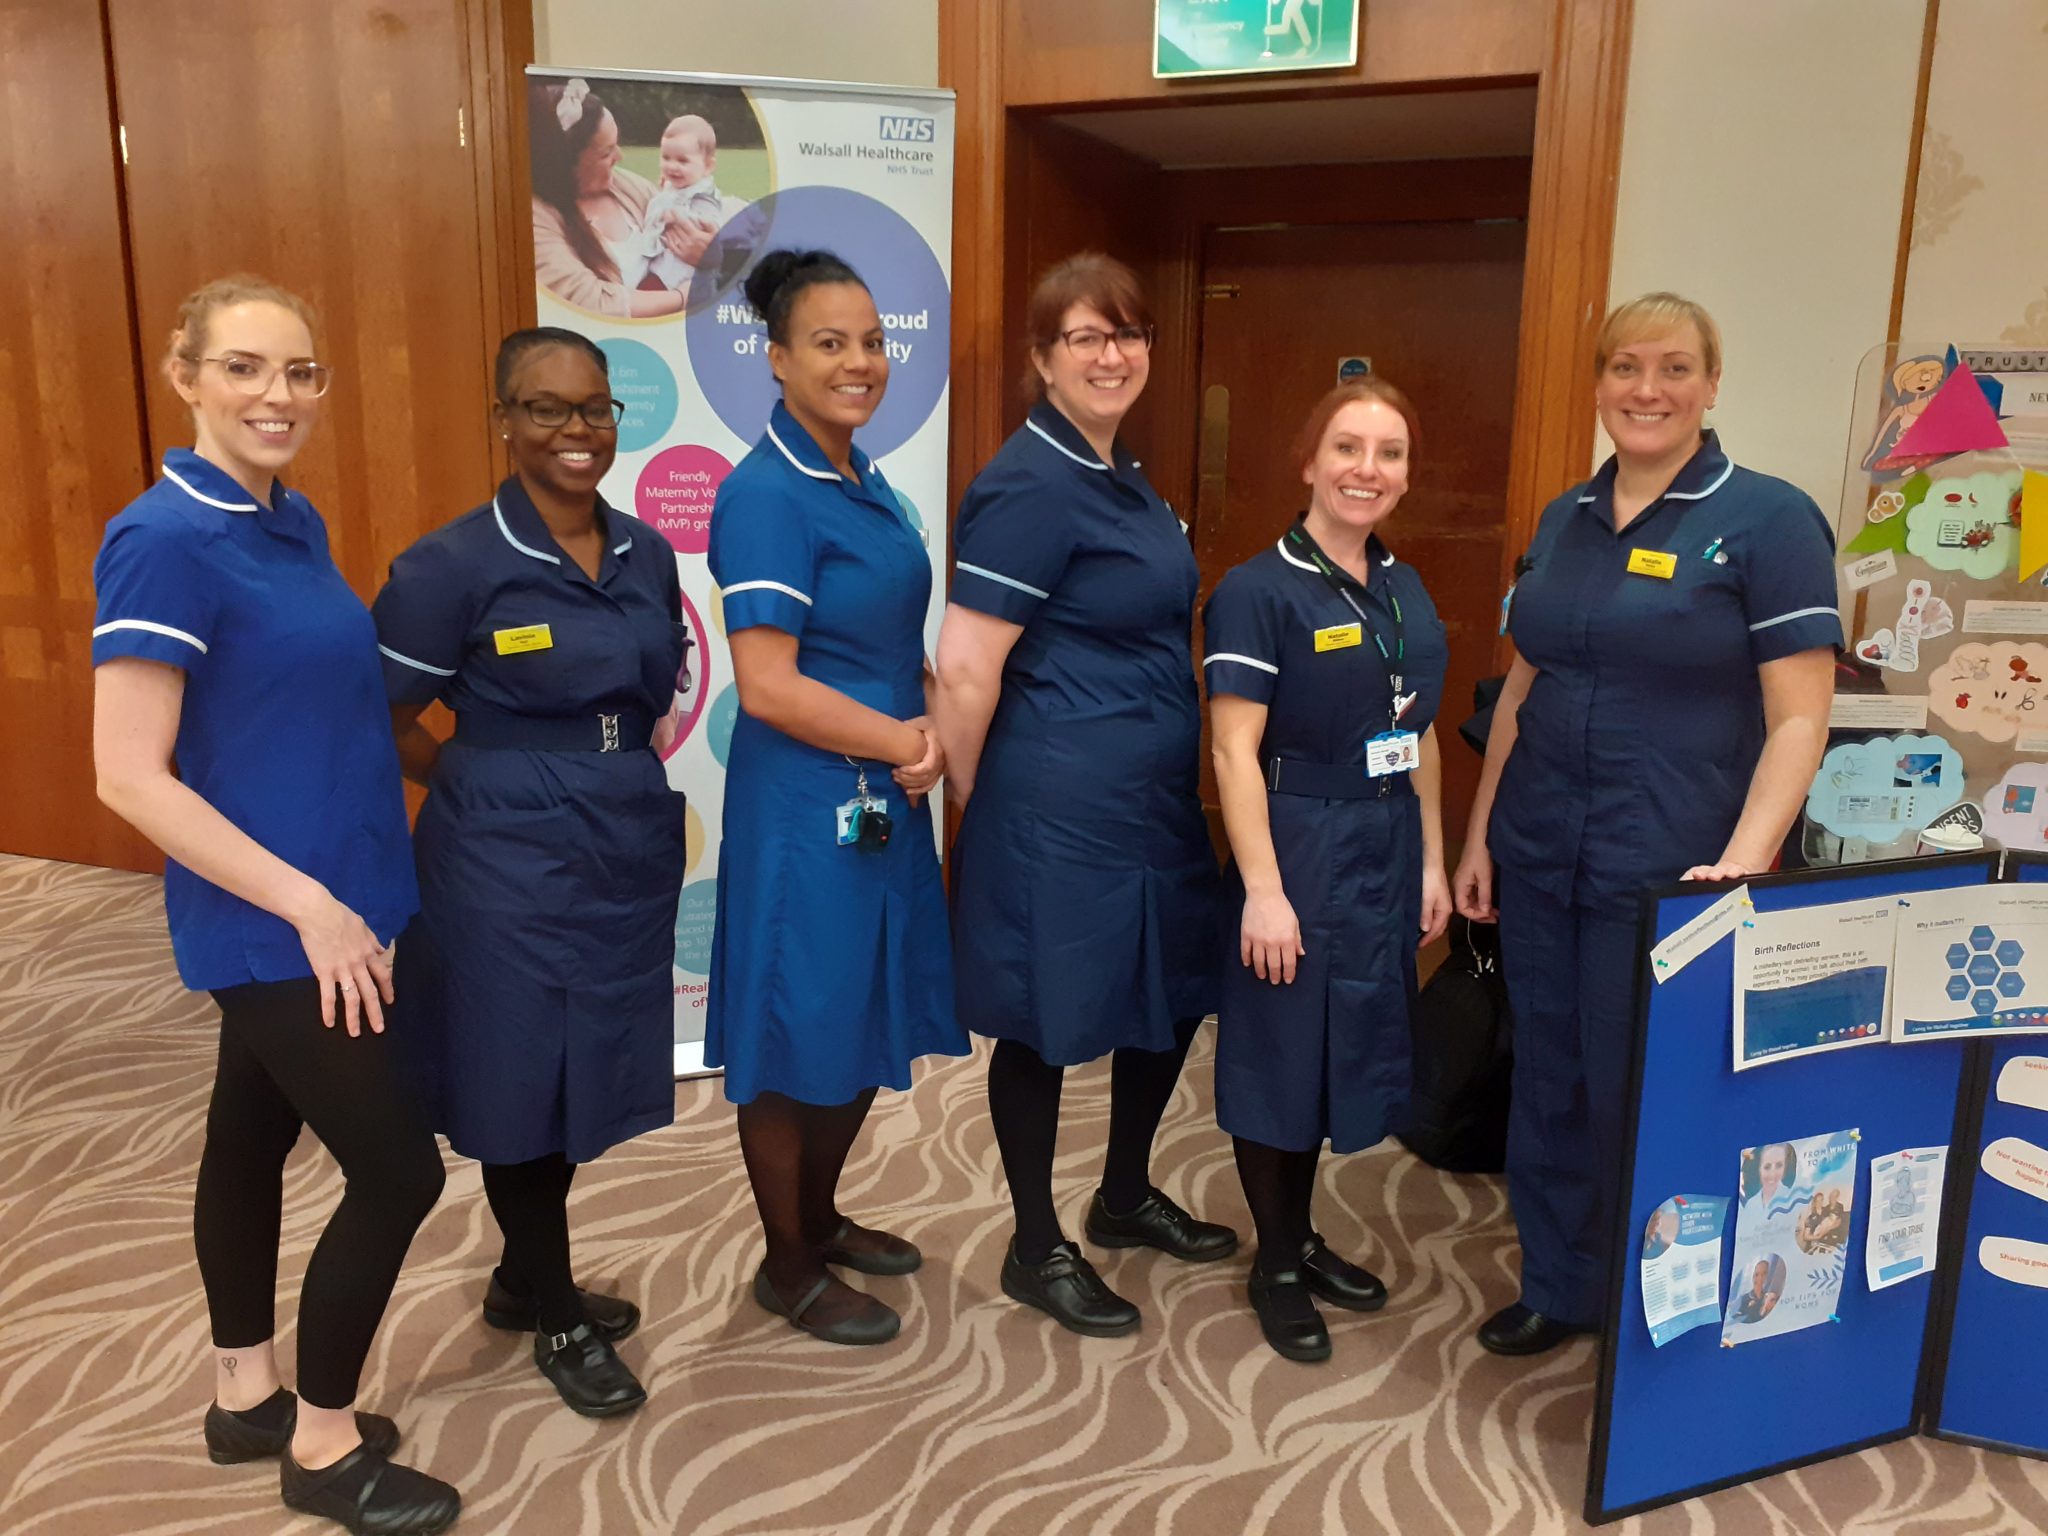 Midwives from Walsall at the event